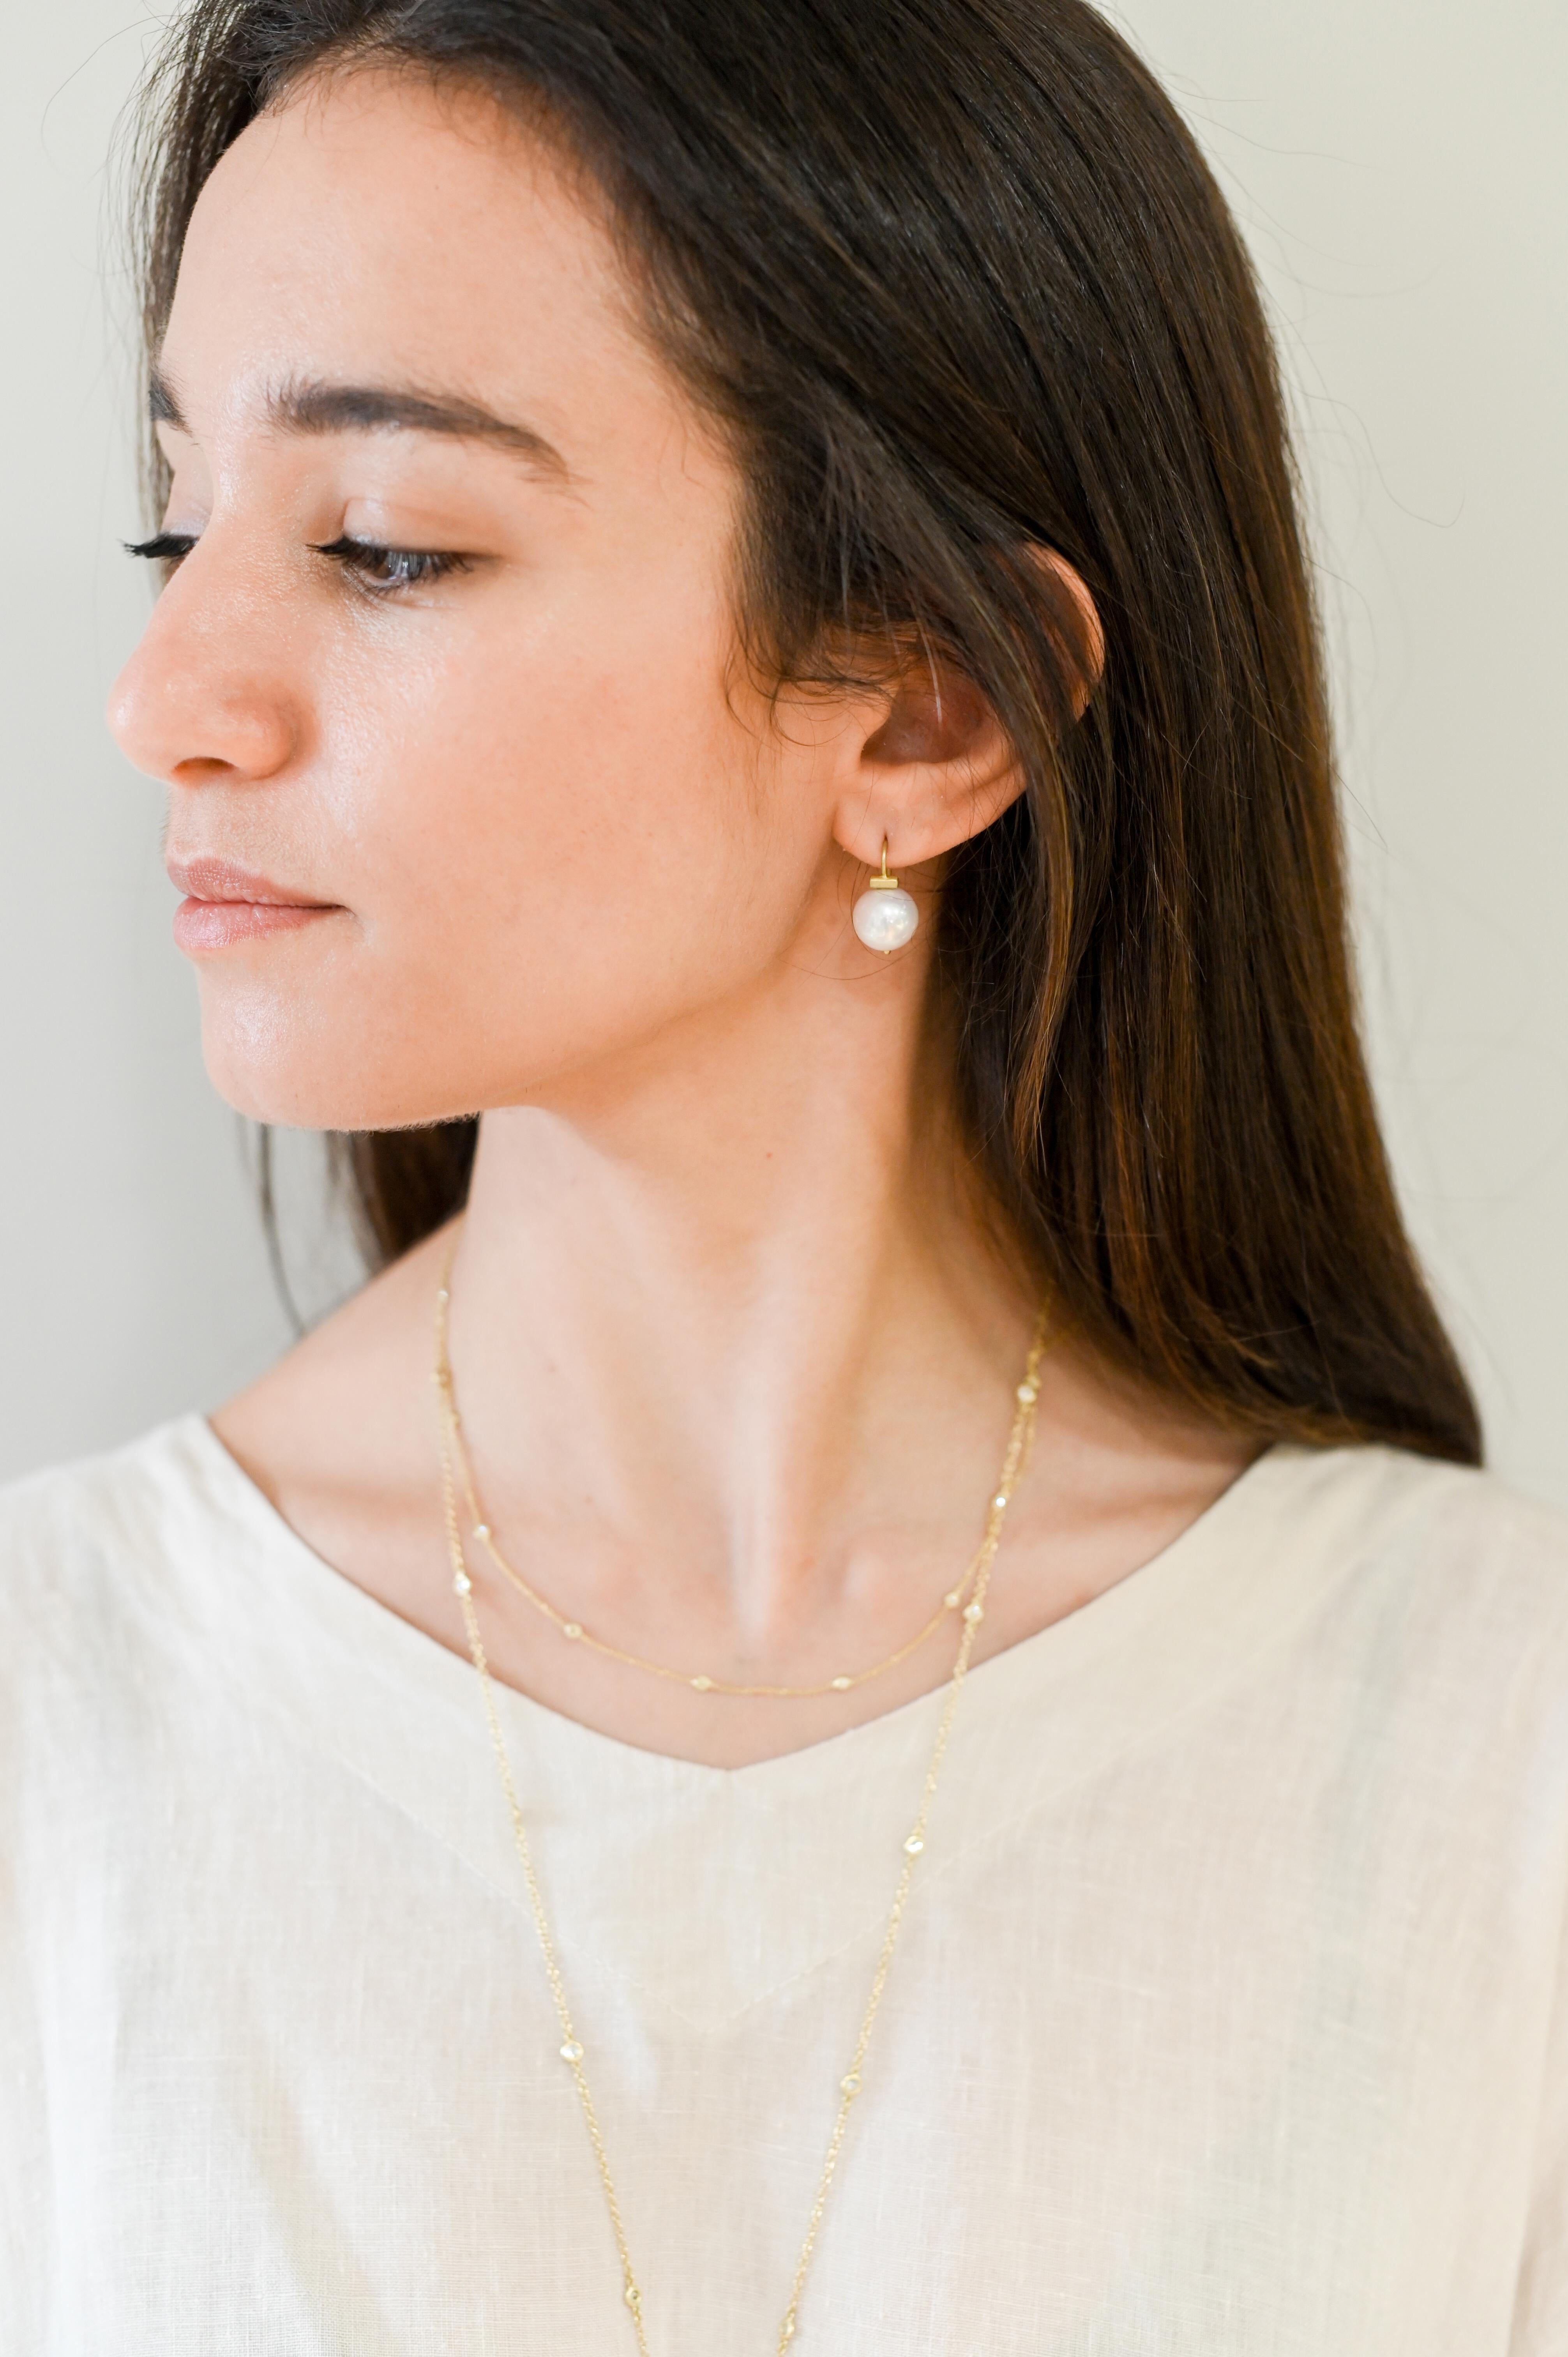 An absolutely stunning go-to earring!  White freshwater pearls on 18 karat gold earwires with a matte finished gold bar.  Modern and wearable for every day.

Length 0.75